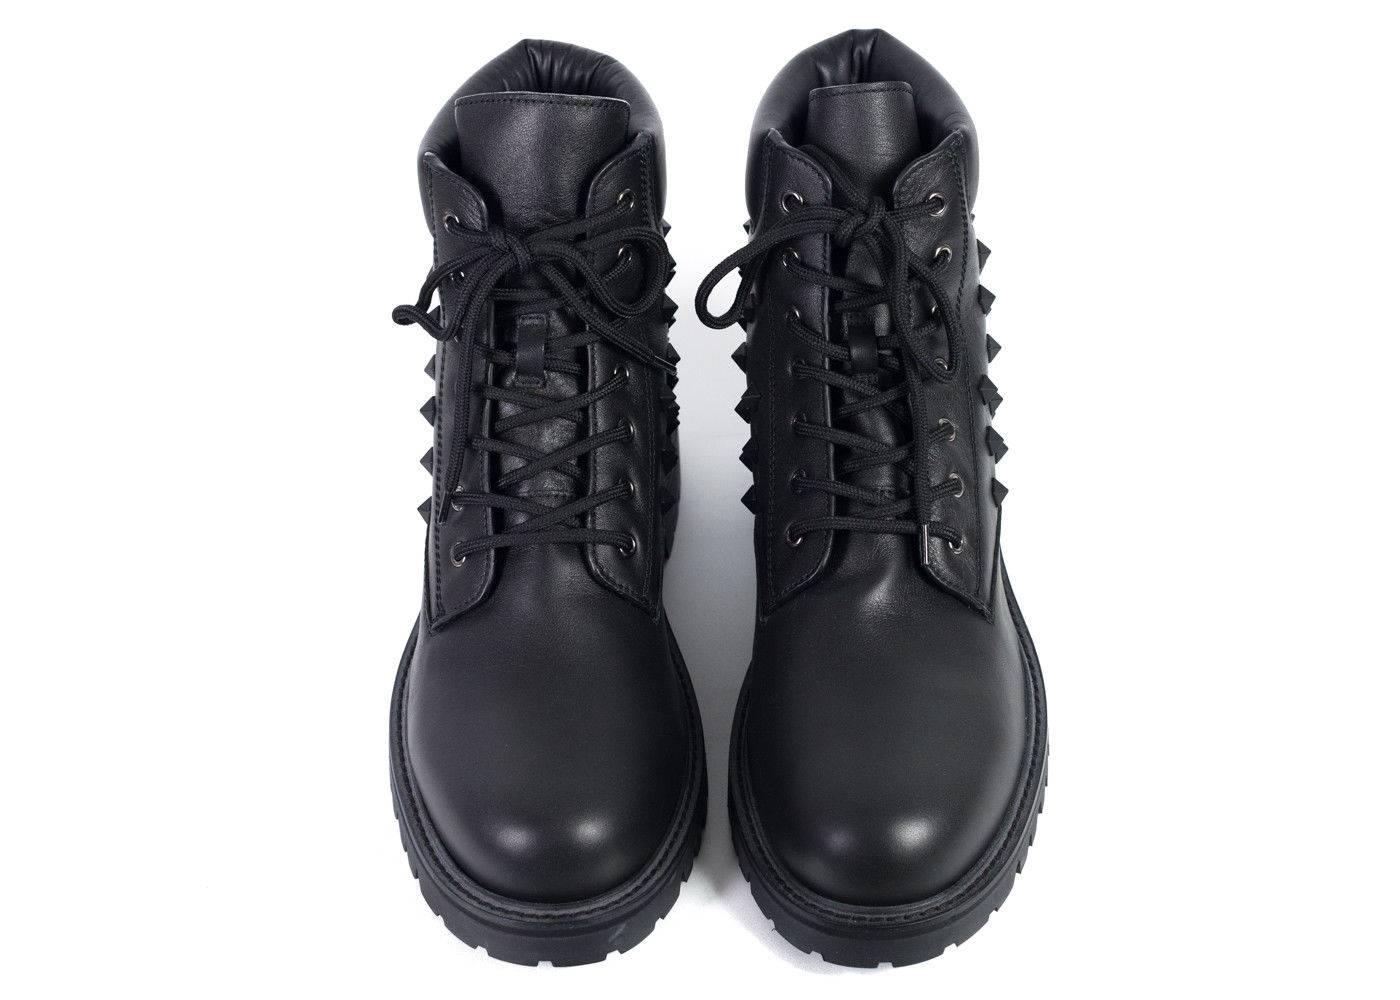 Brand New Valentino Men's Combat Boots
Original Box & Dust Bag Included
Retails in Stores & Online for $1345
Size IT40 / US7 Fits True to Size

Valentino's rendition of a classic black combat boot with their house's signature rocketed